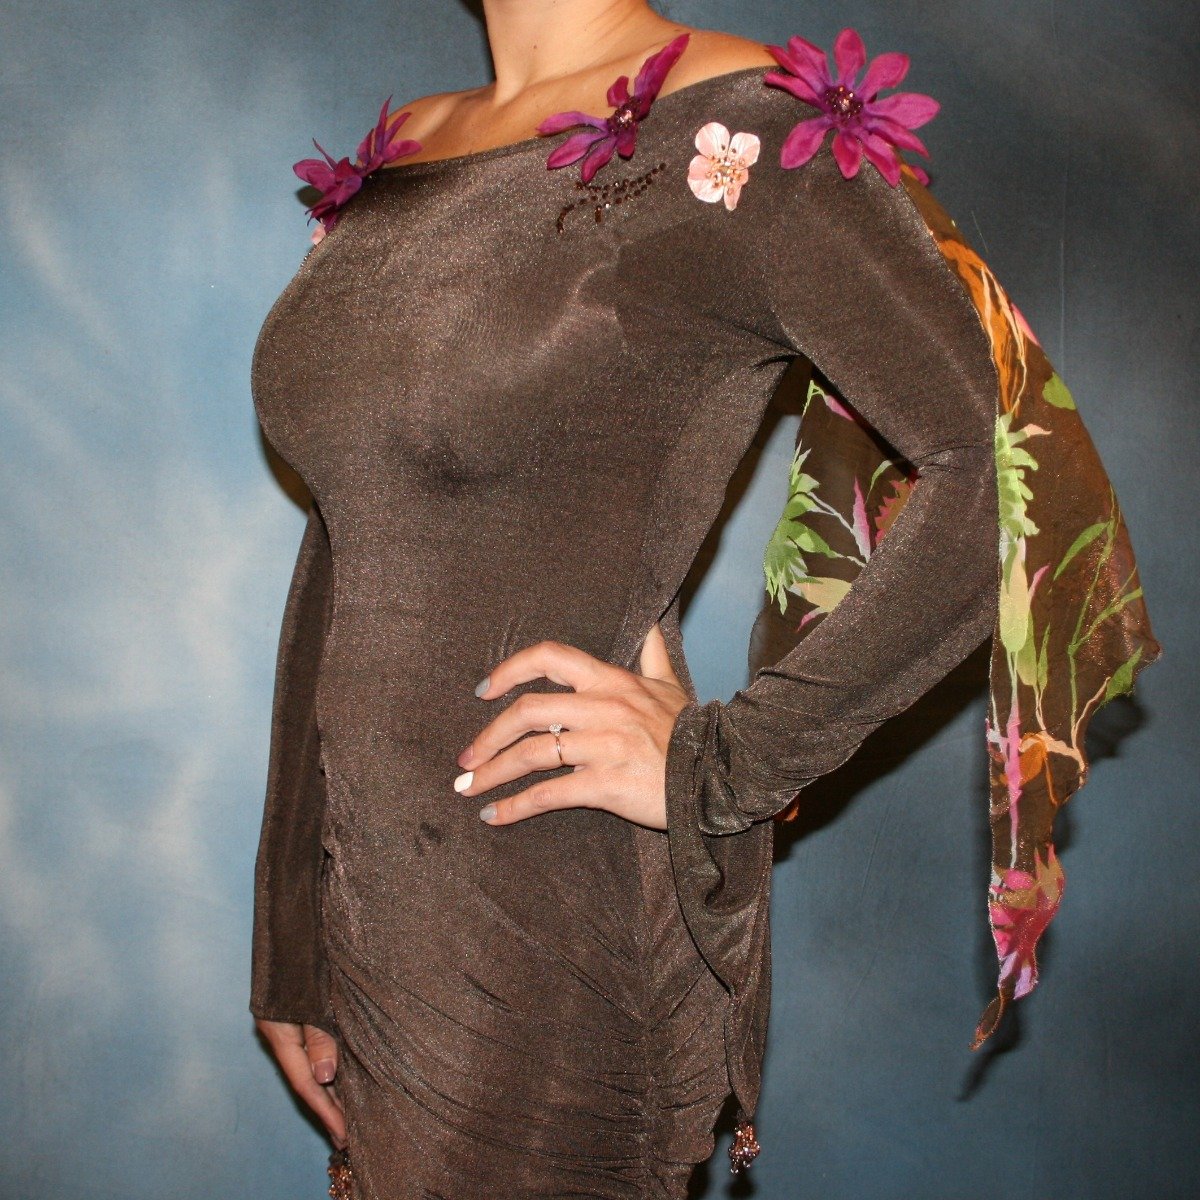 Crystal's Creations close up view of brown ballroom dress created of luxurious chocolate brown slinky along with fall flowers print chiffon